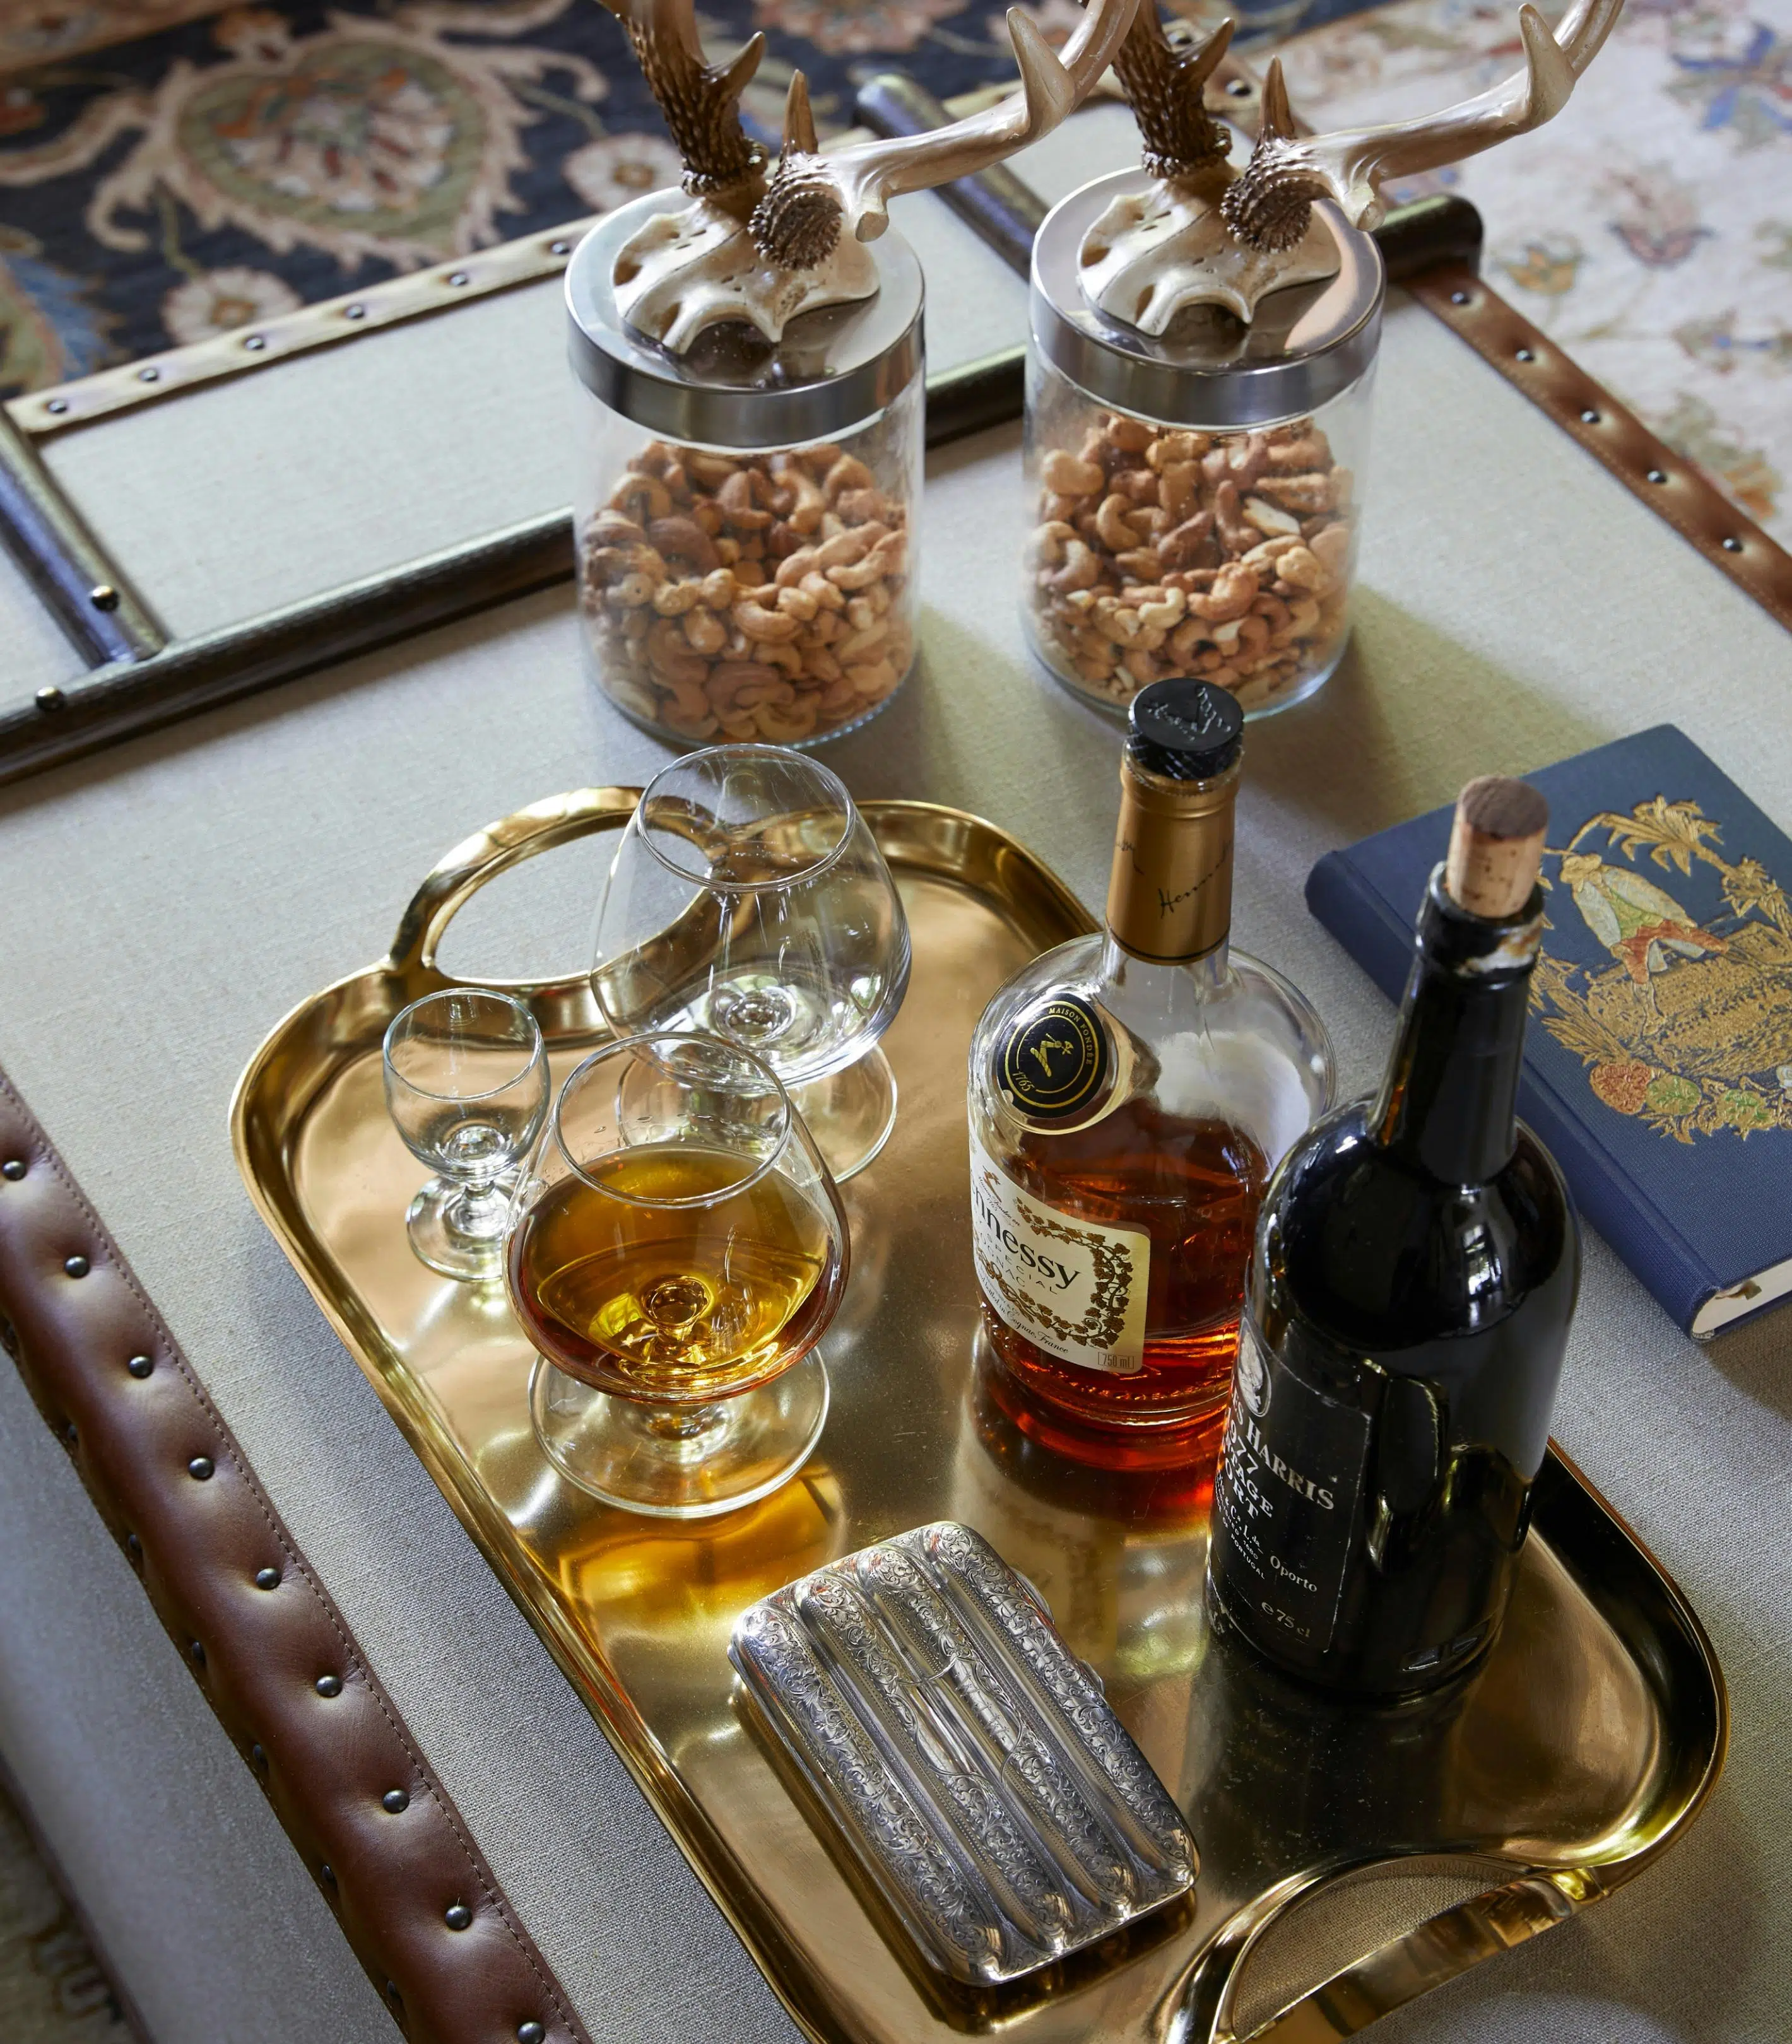 A bottle of Hennessy and a bottle of port sit on a gold tray with some glasses and what appears to be a cigarette box. Two jars contain cashew nuts, and in the background a patterned carpet is visible